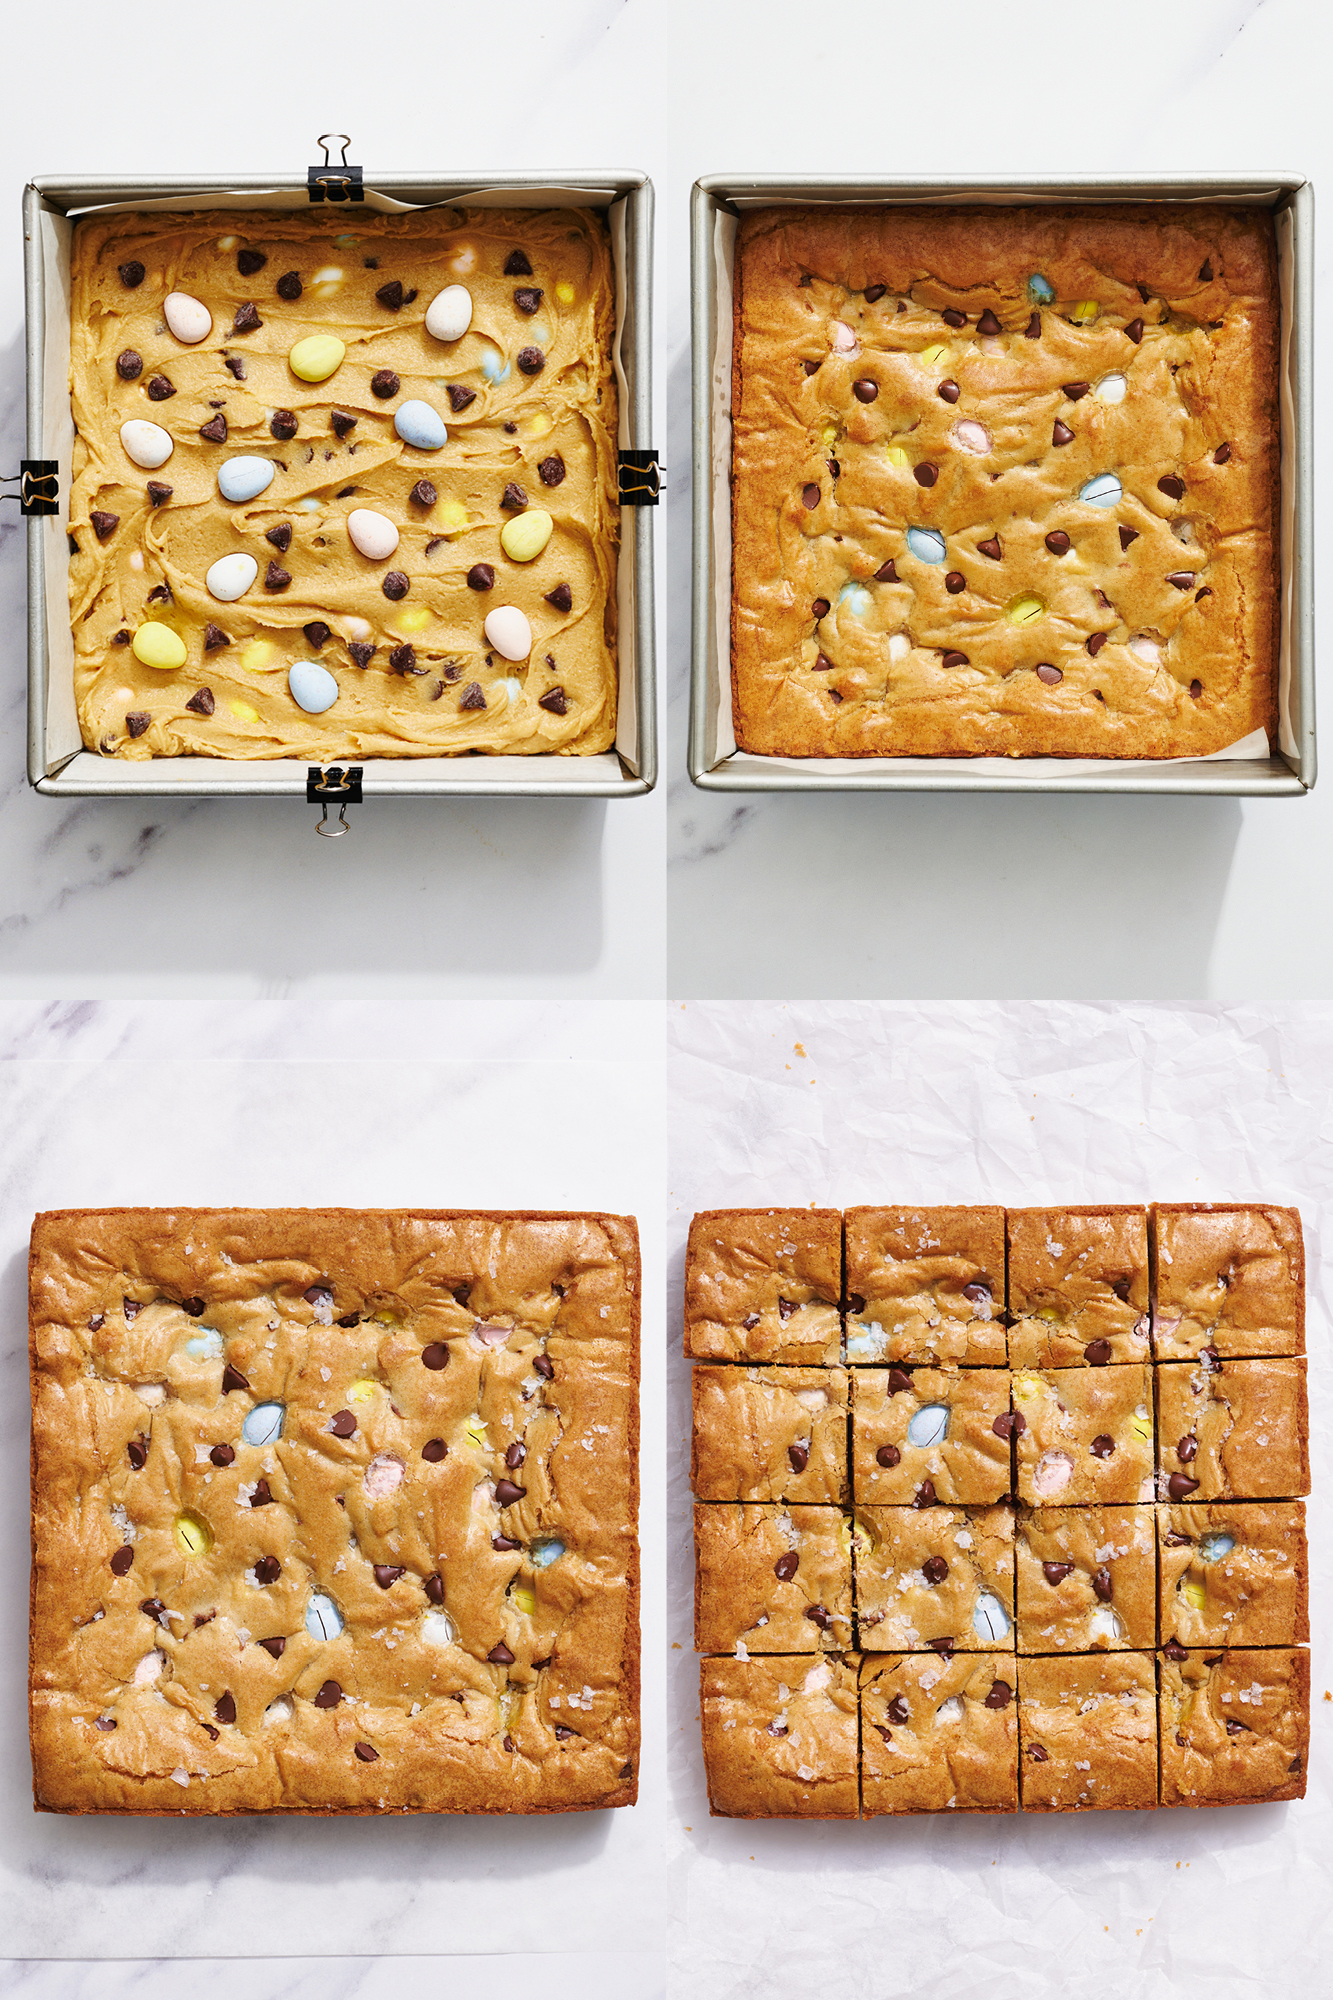 step-by-step pictures showing how to make this recipe.